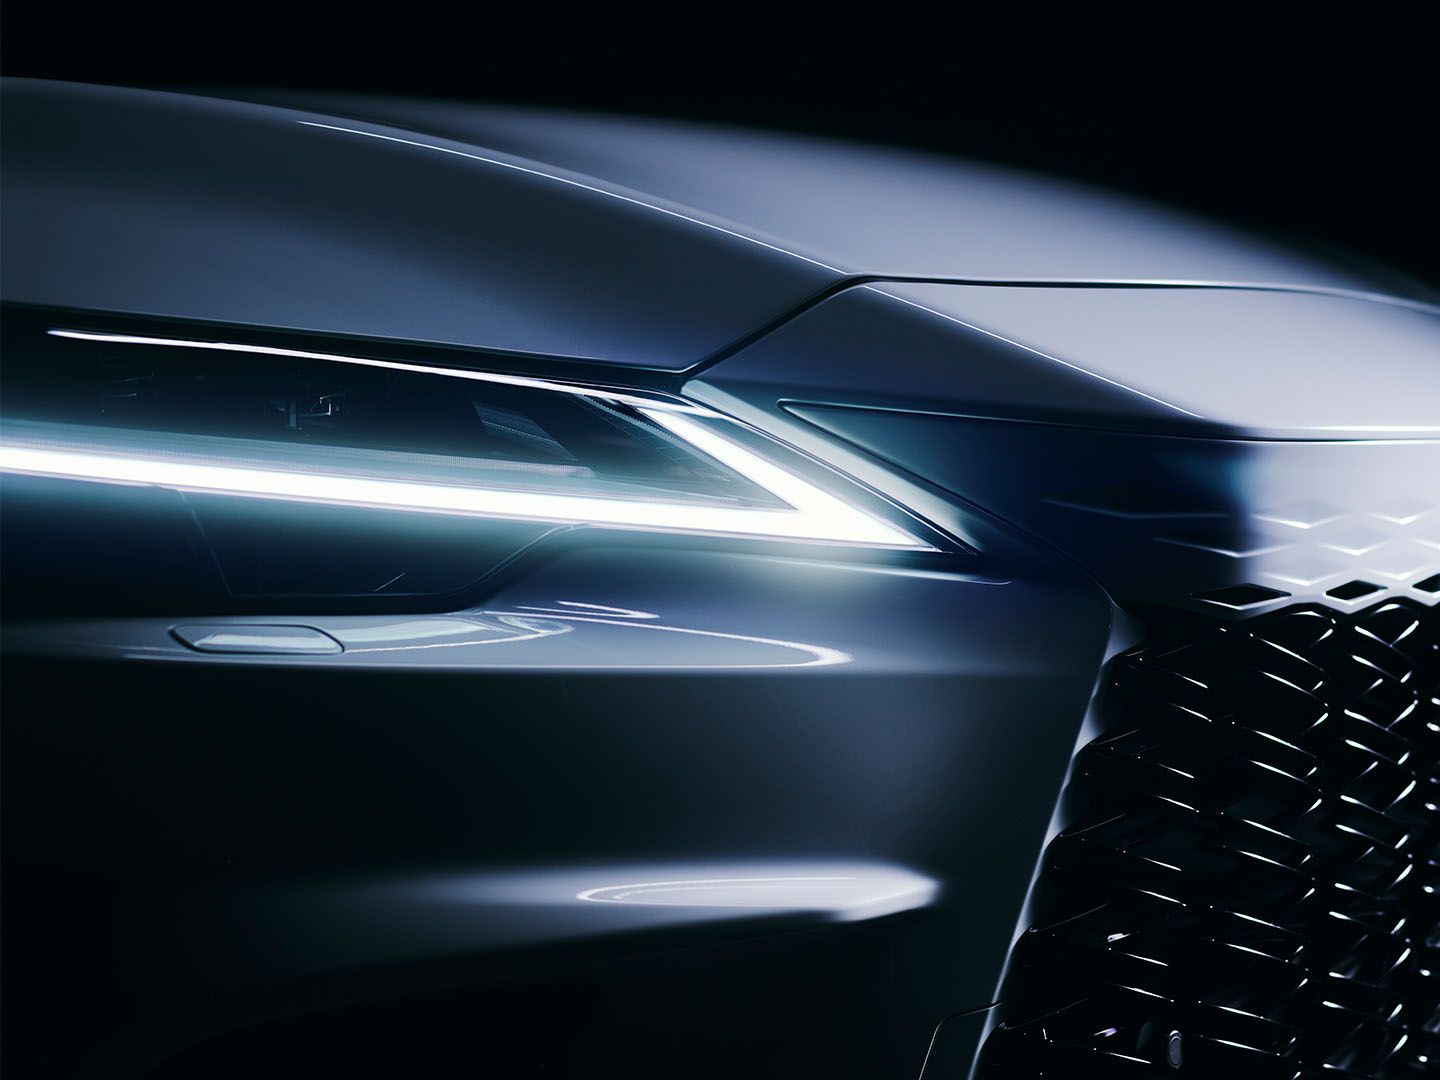 The front lights of a Lexus RX